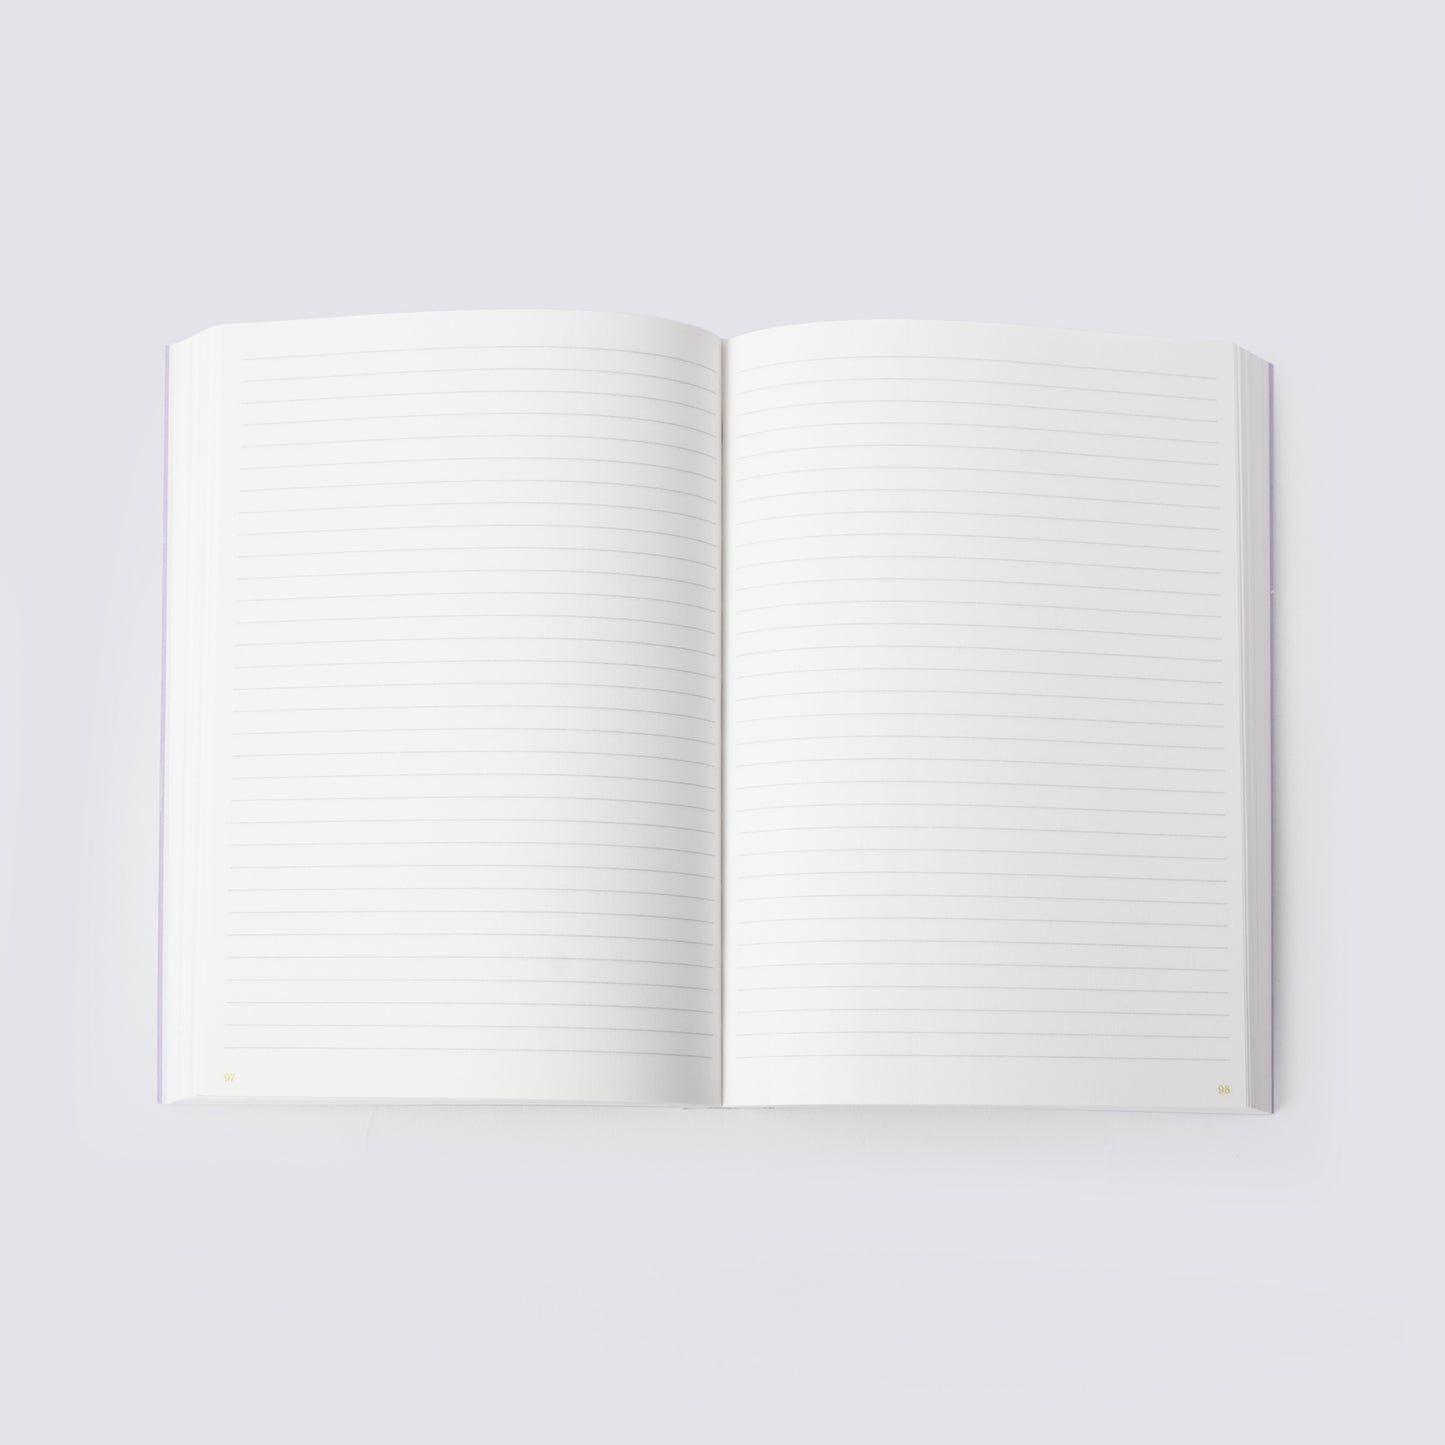 Open notebook with ruled pages